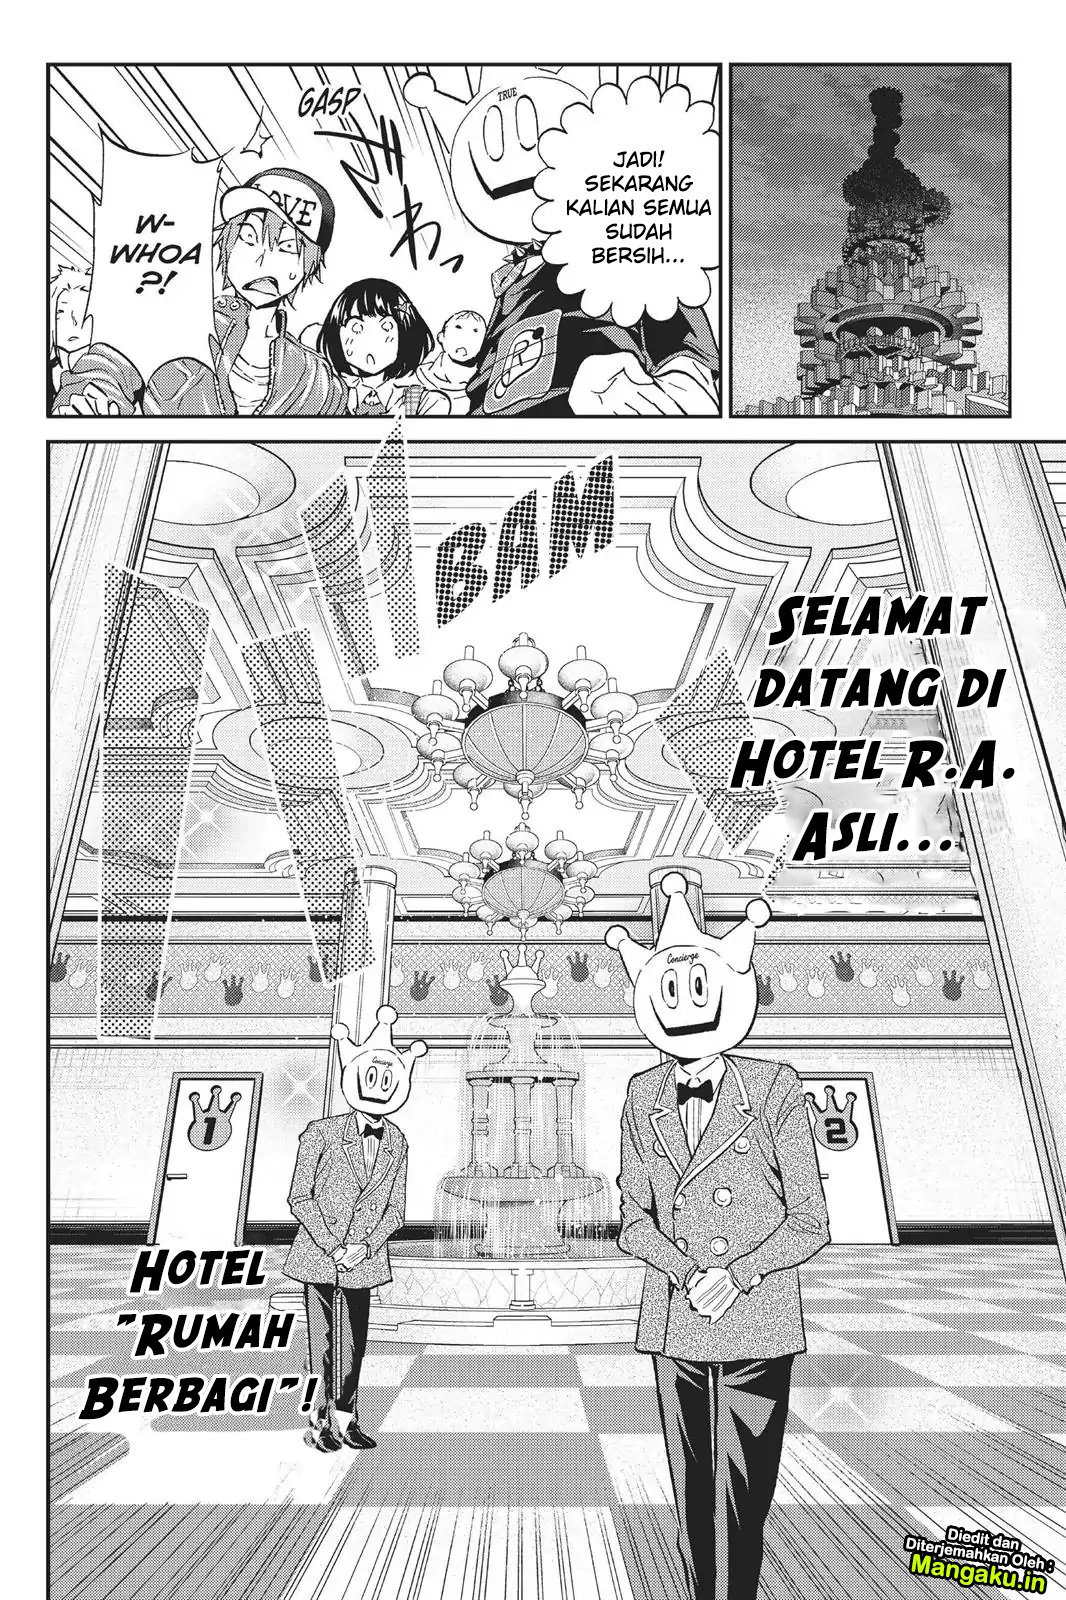 Real Account 2 Chapter 73